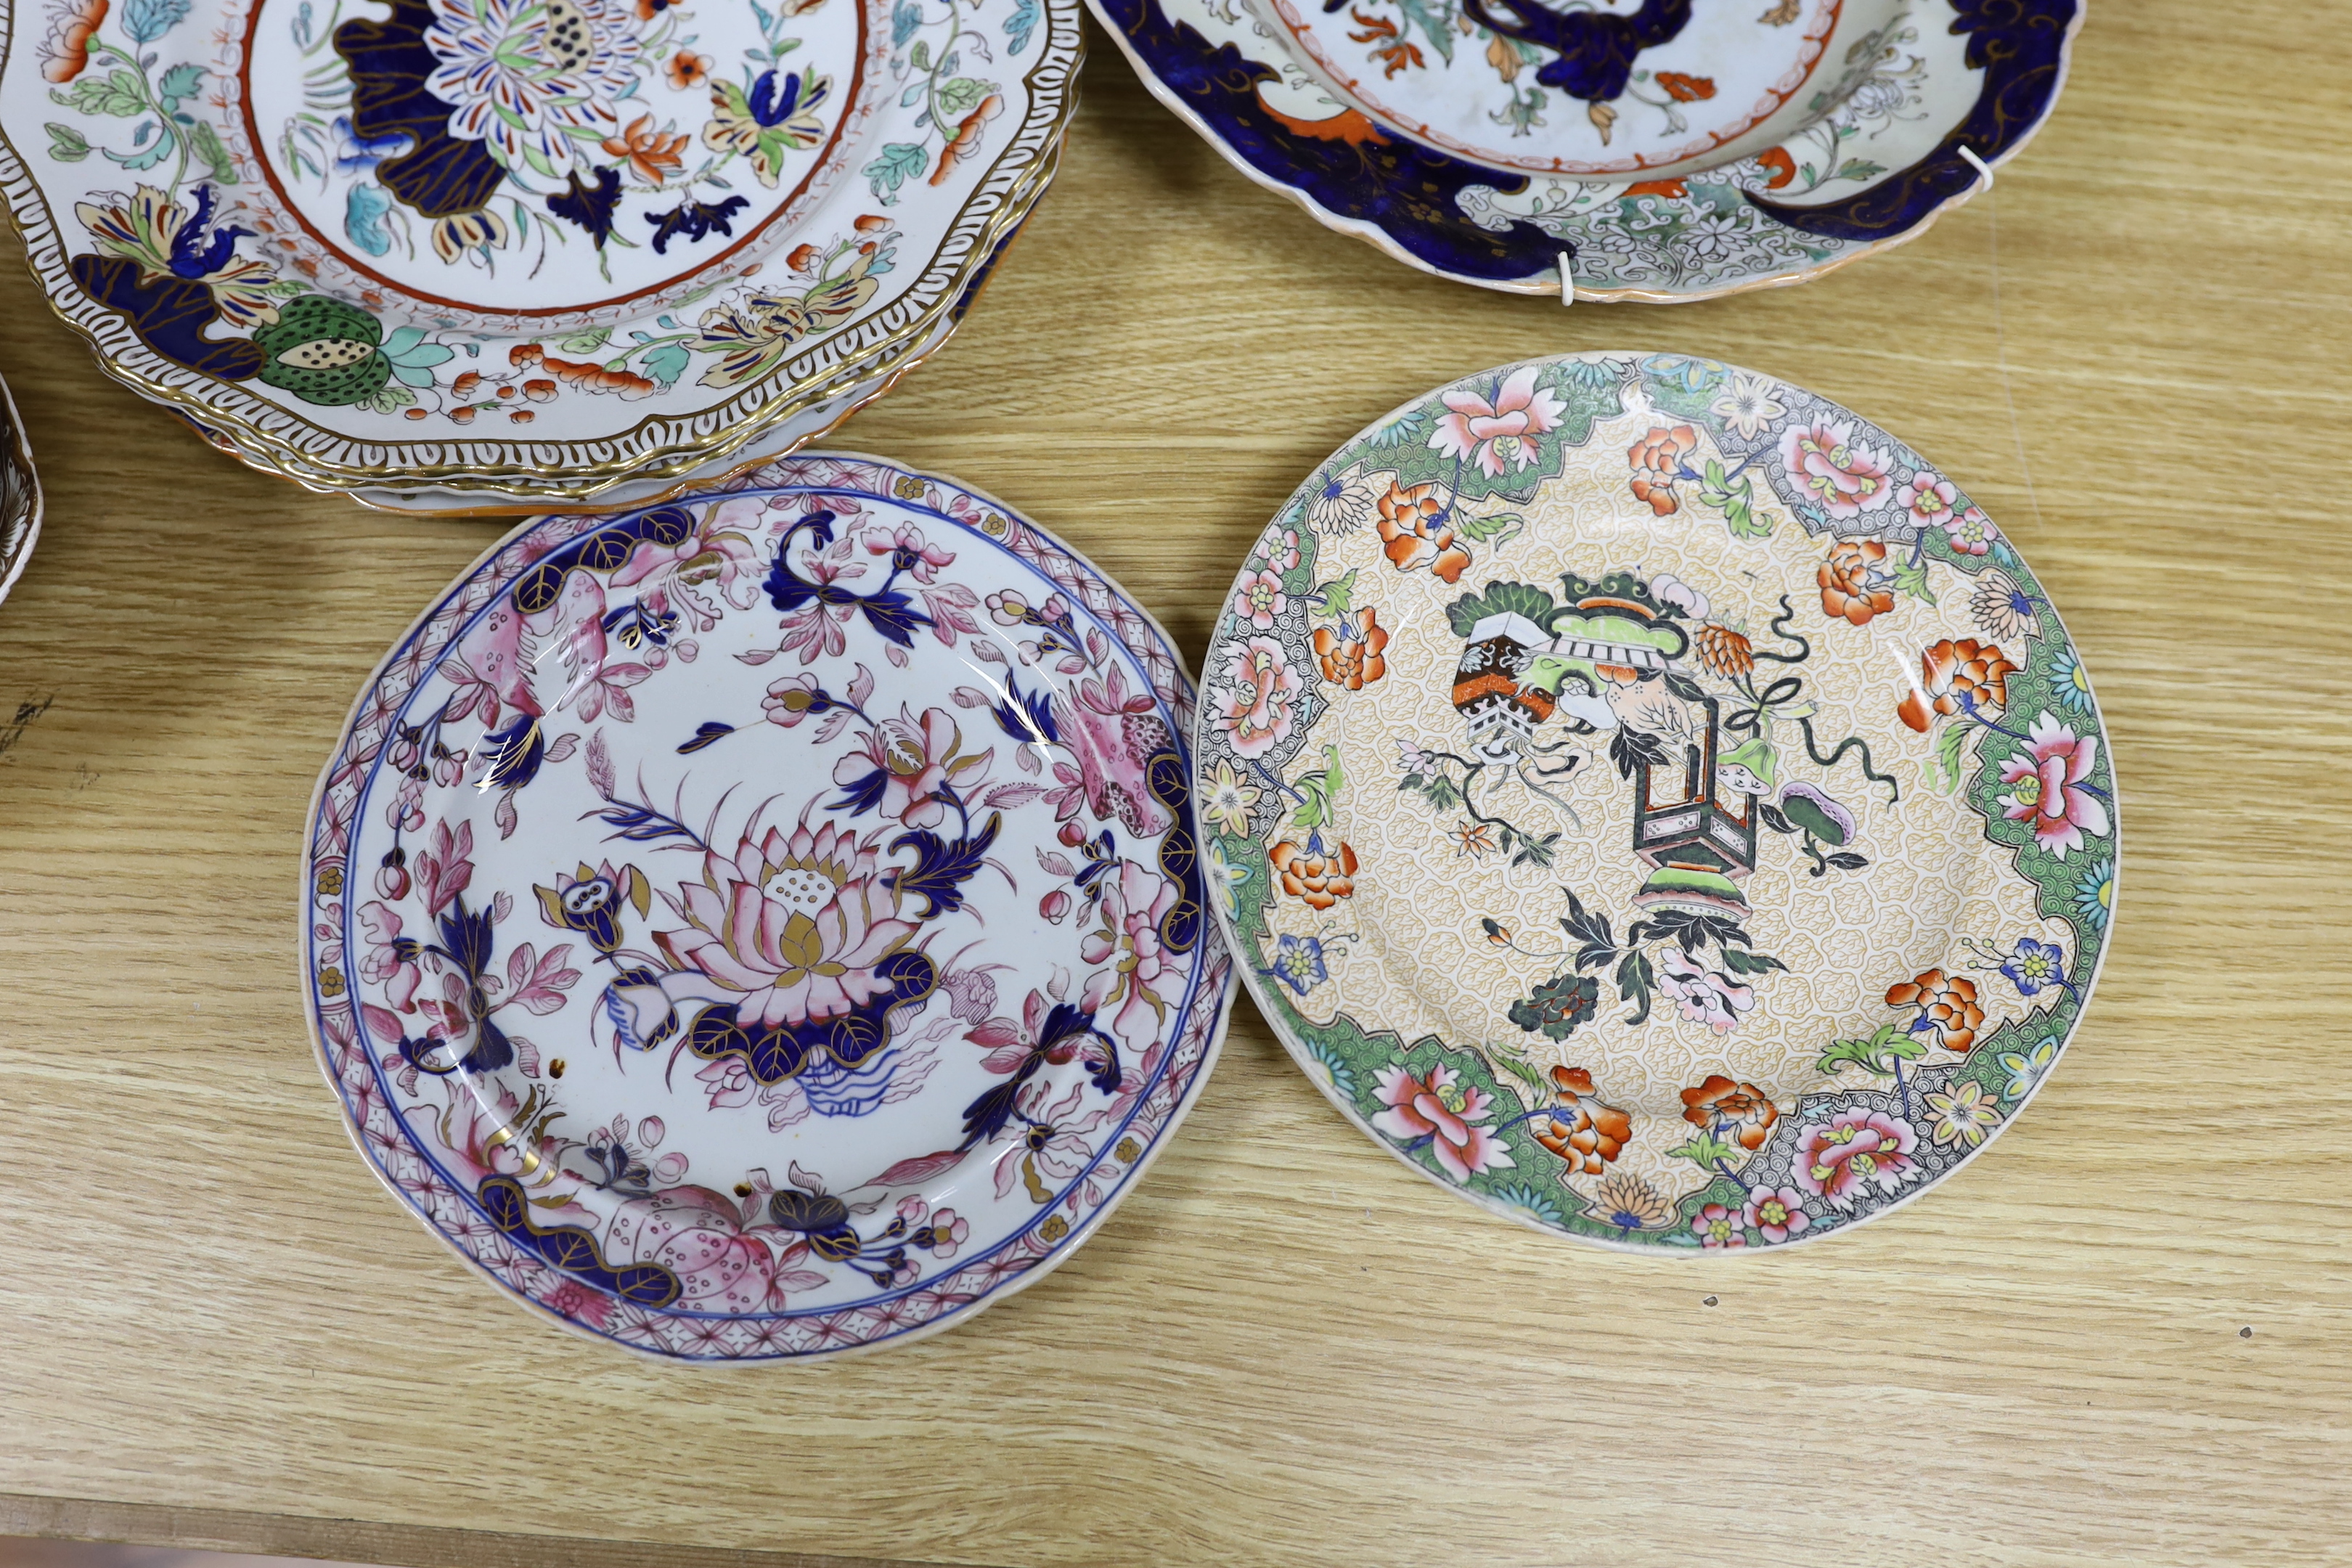 Twenty three mixed Spode, Masons and Ashworth Ironstone dishes, plates and a coffee can